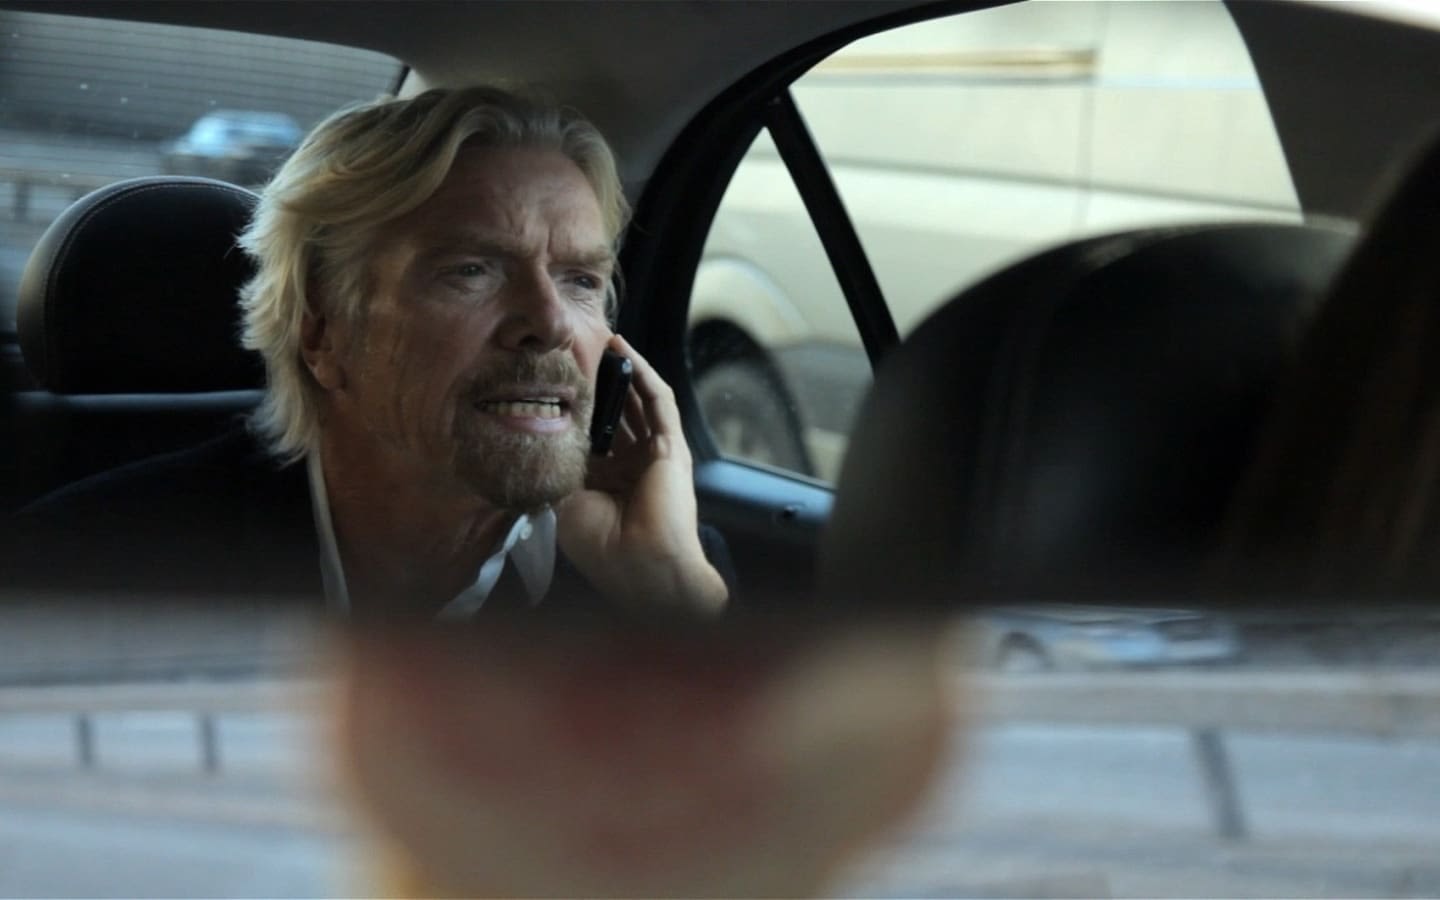 Richard Branson sitting in the back of a car on the phone